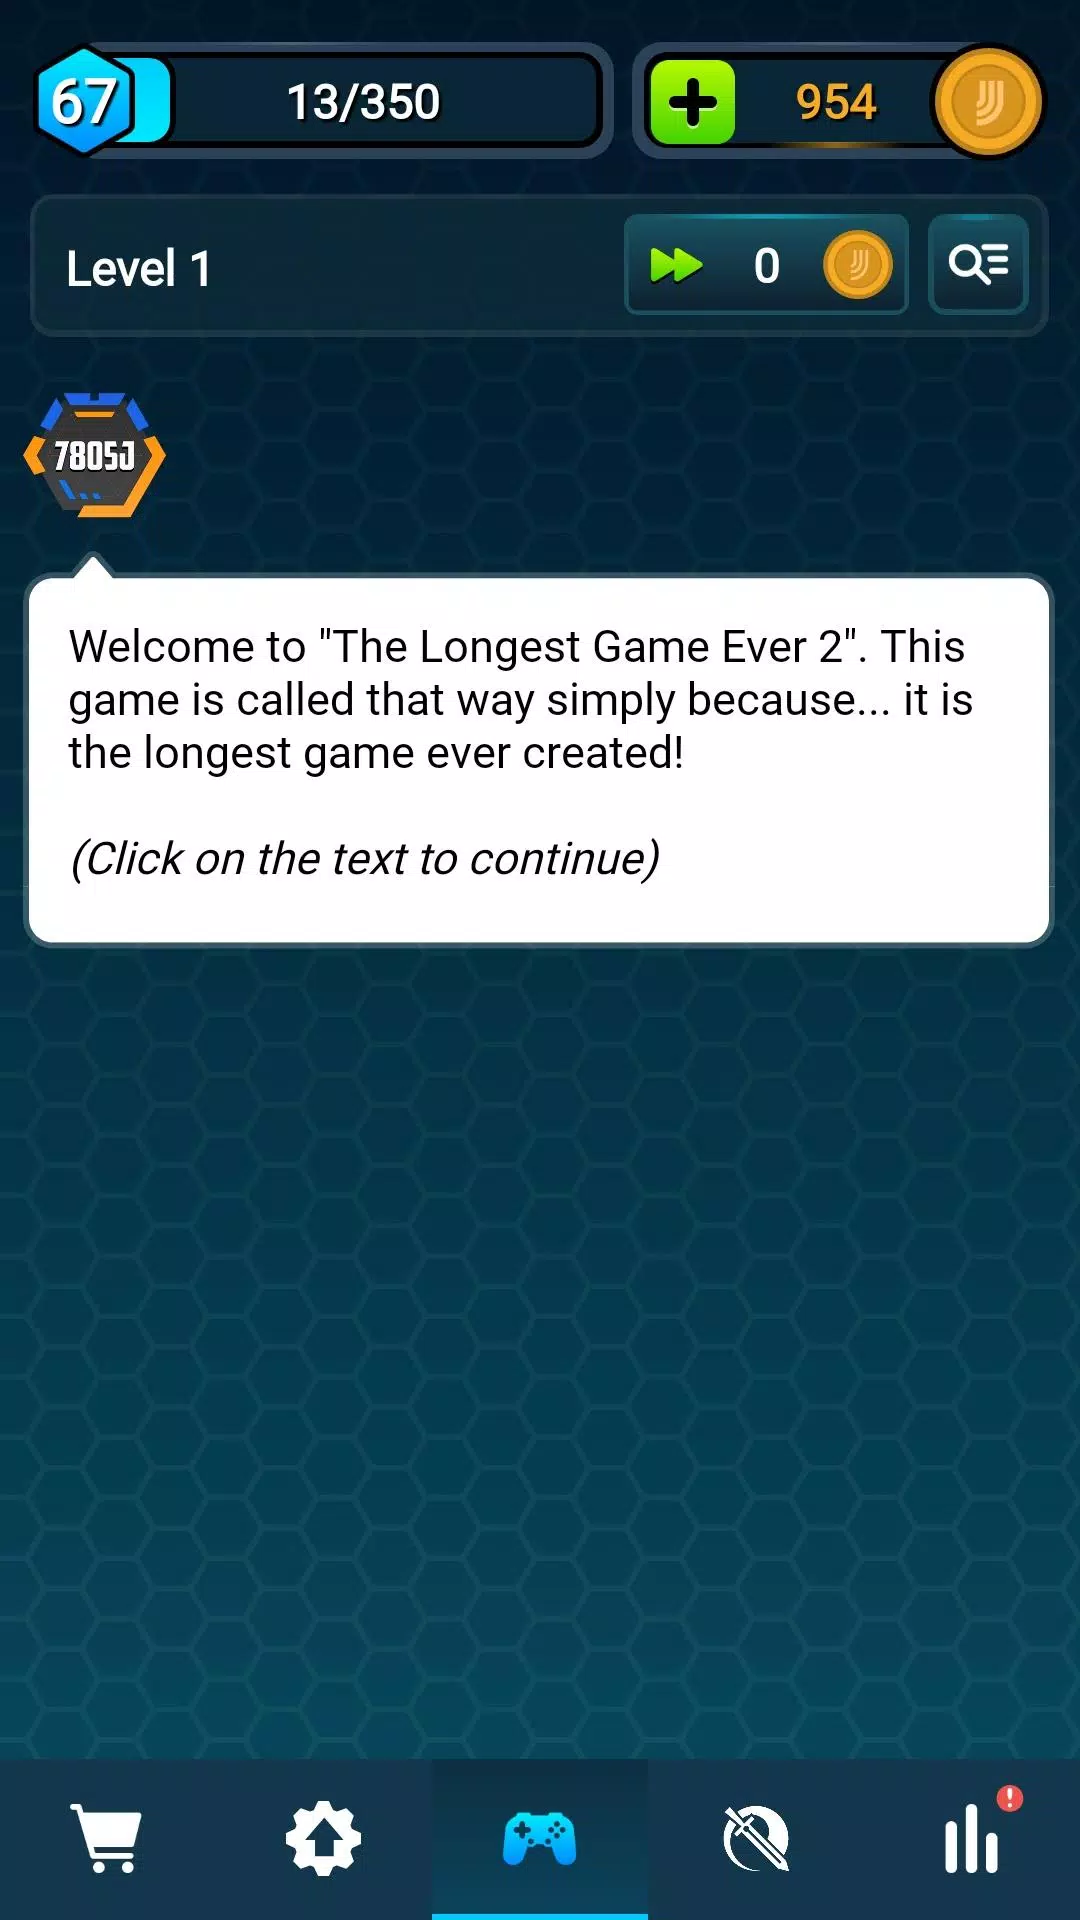 The Longest Game